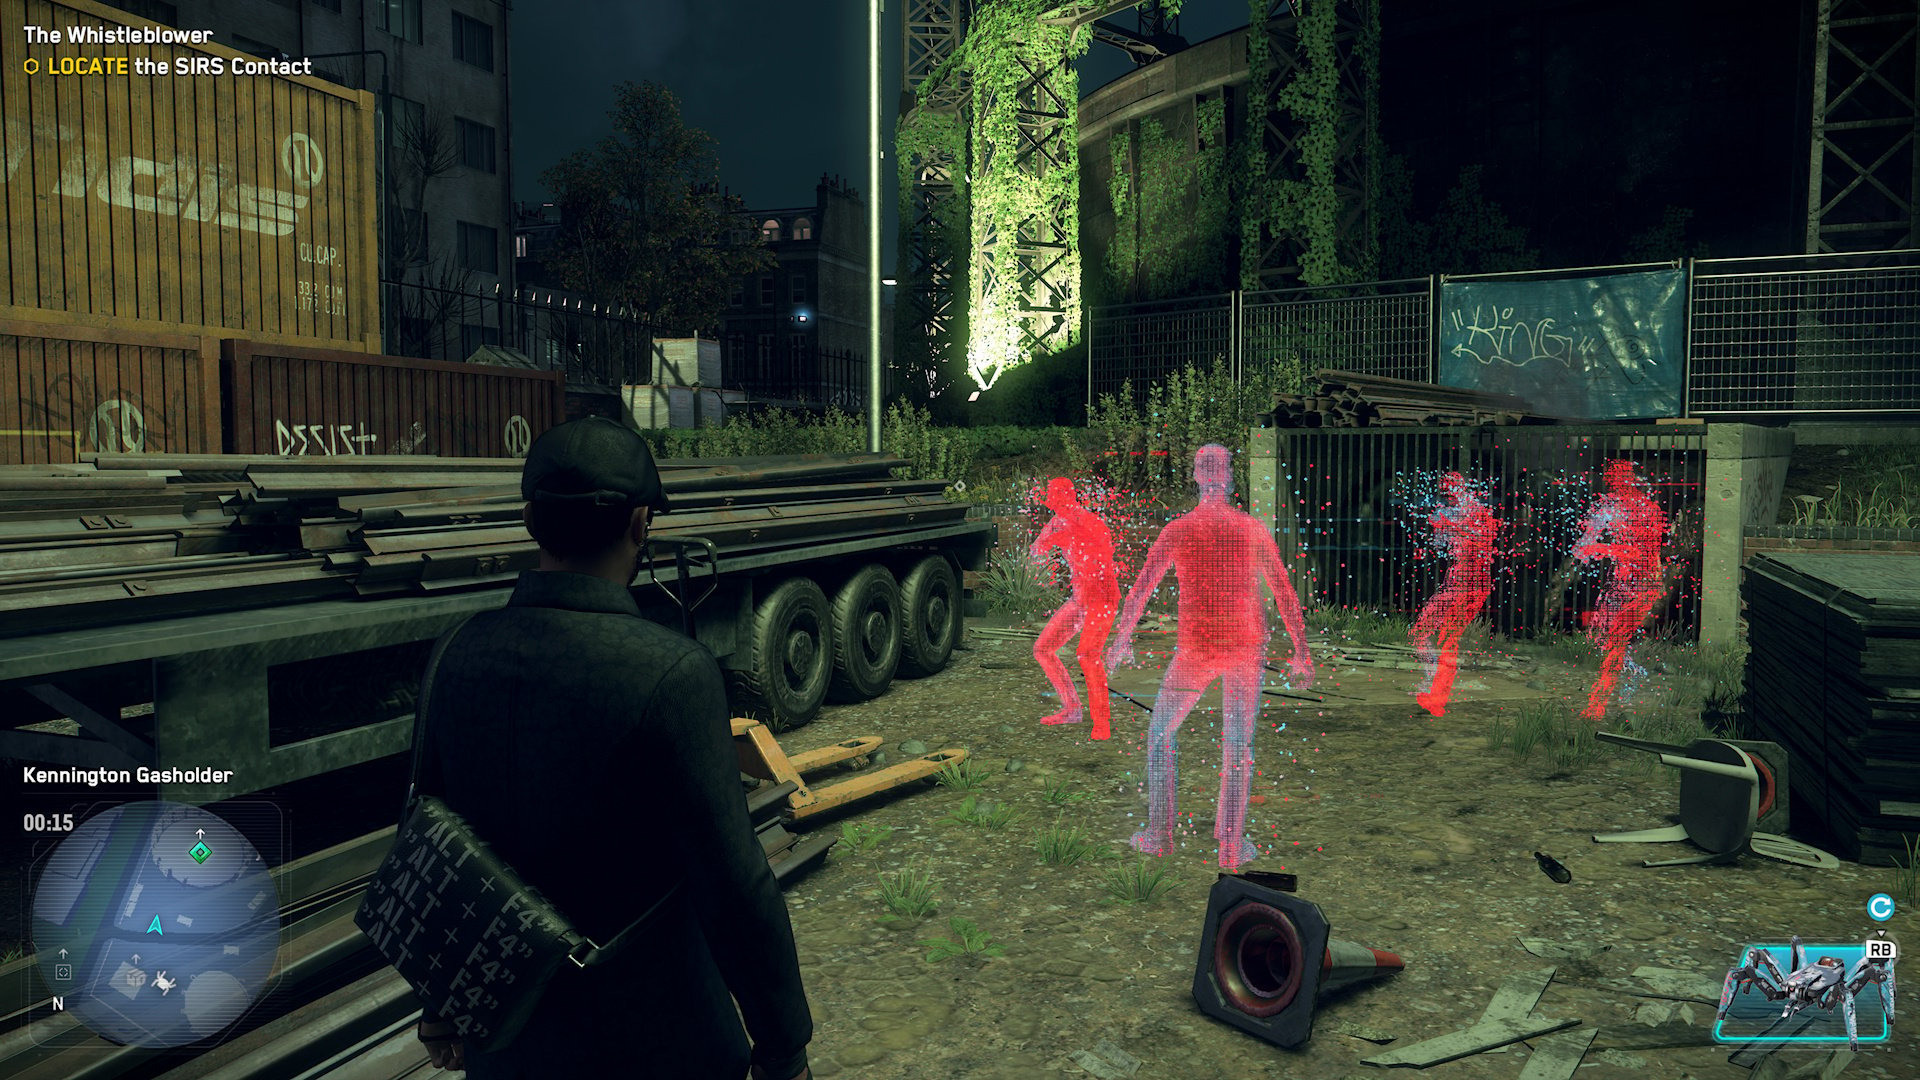 Watch Dogs: Legion review - This is how it runs on PC